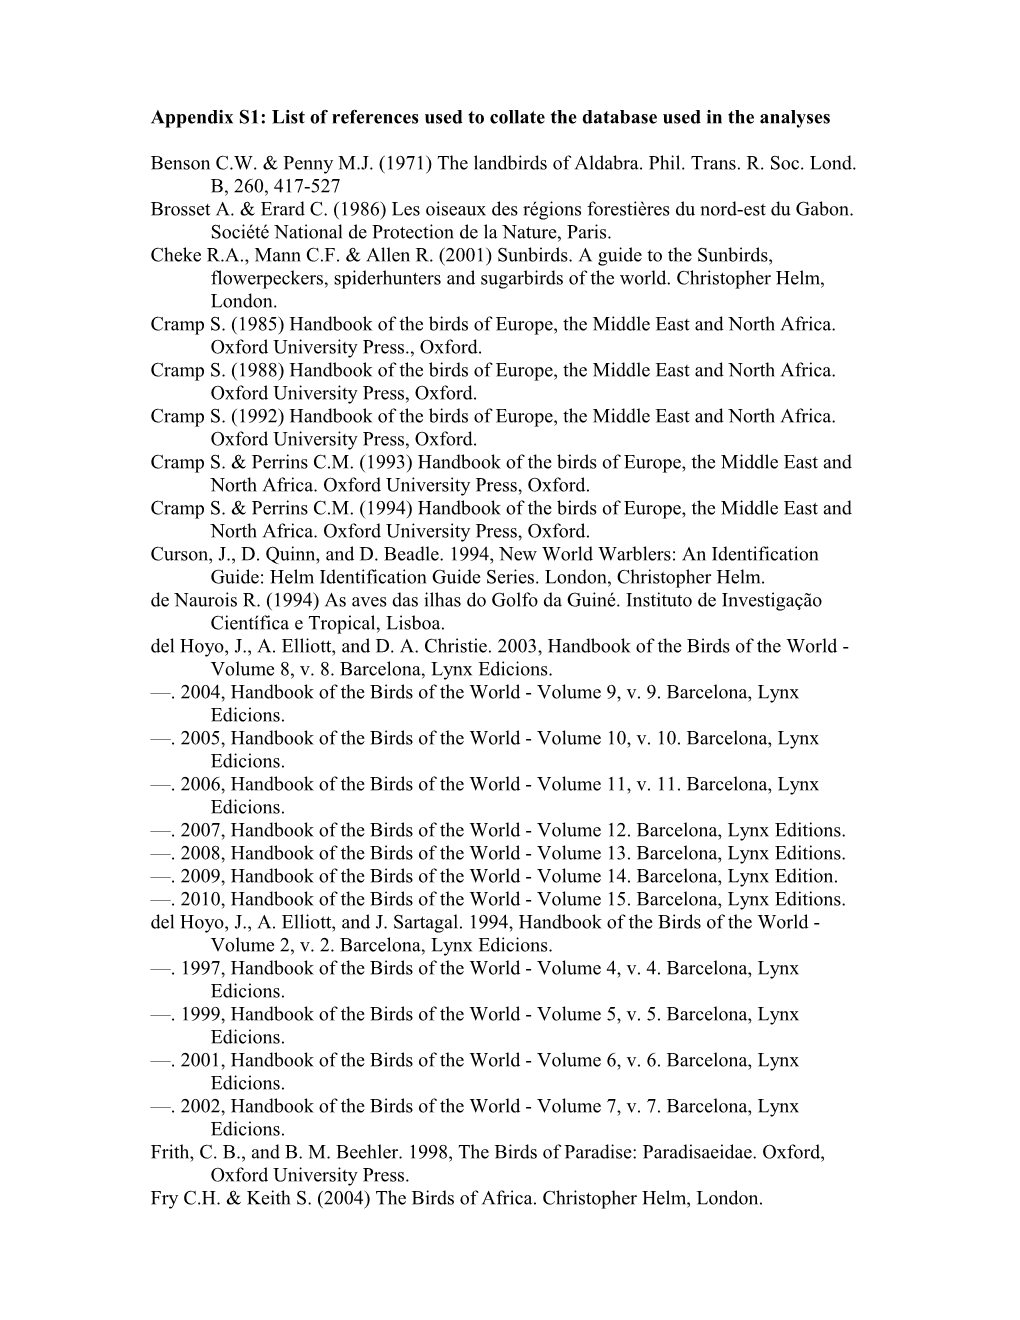 Appendix S1: List of References Used to Collate the Database Used in the Analyses